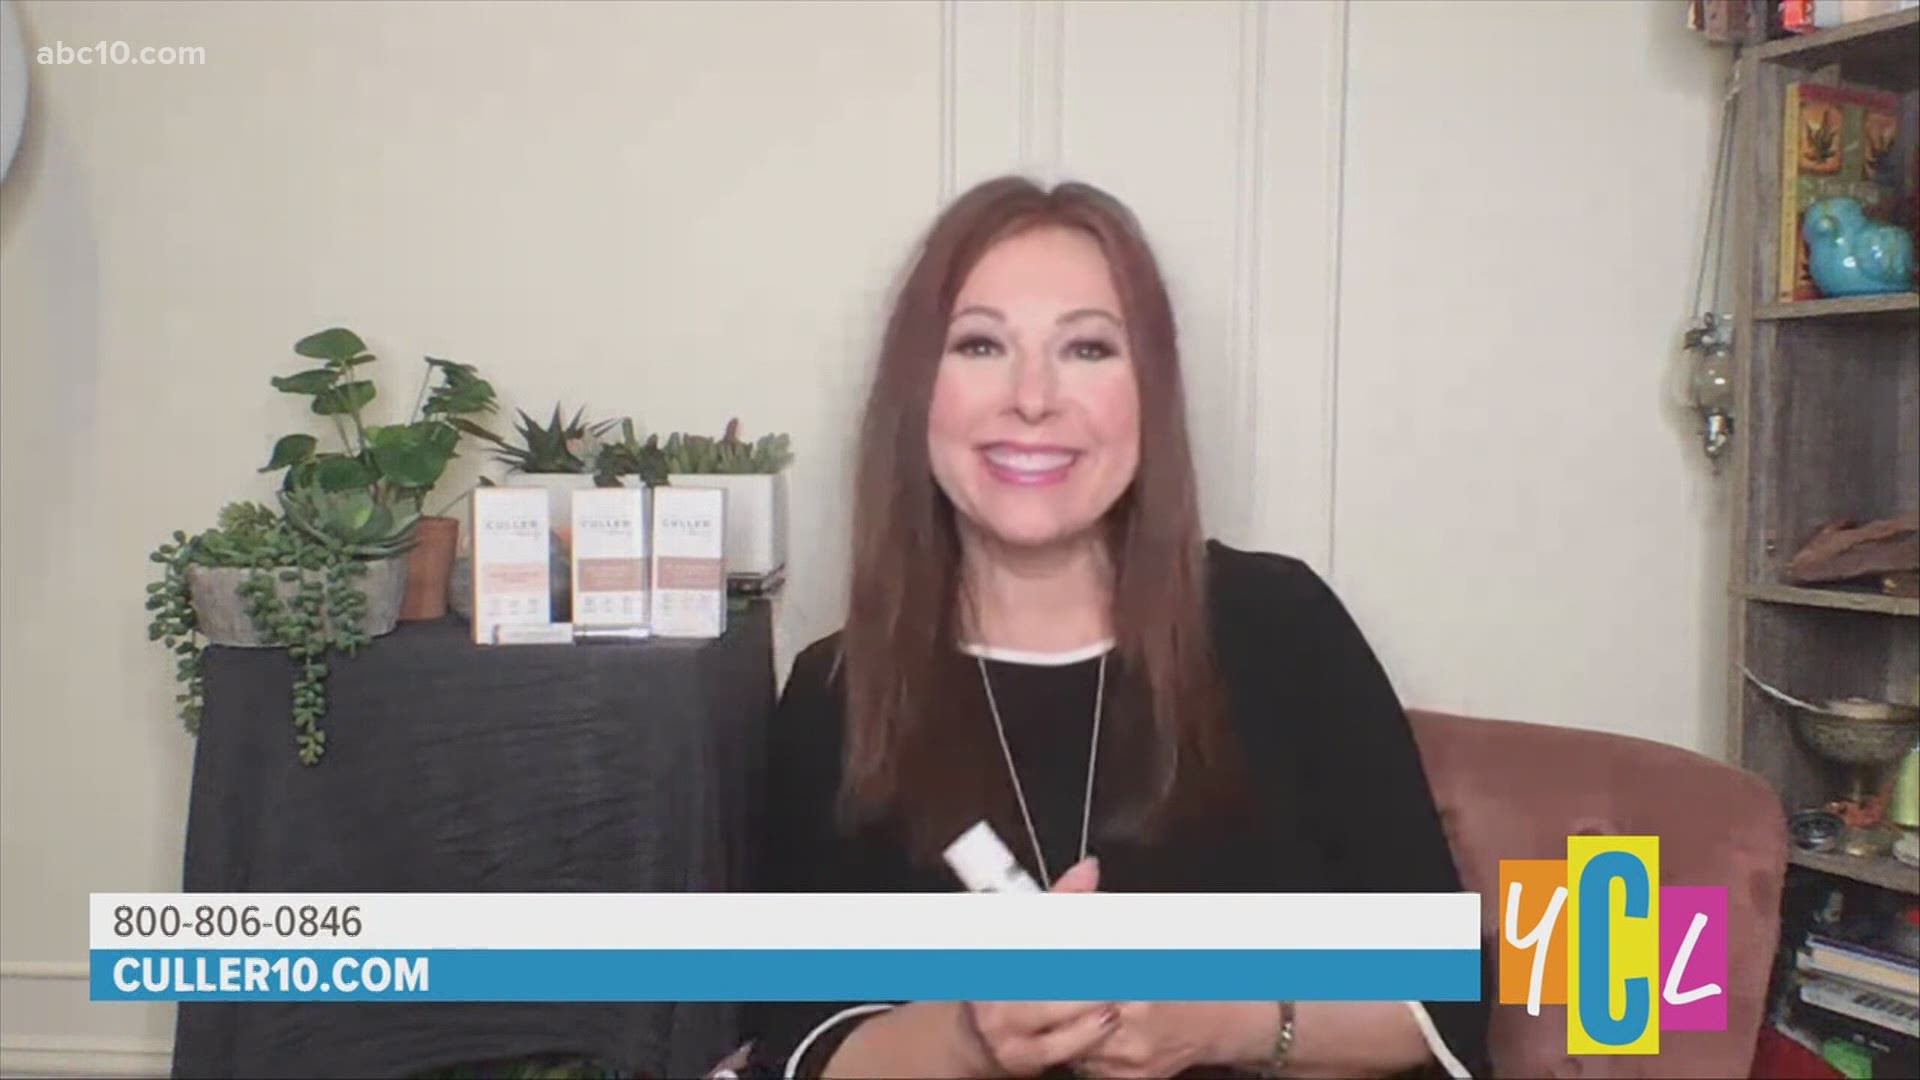 Hear how Culler Beauty Self-Adjusting Foundation can take the guess work out of your makeup routine. This segment paid for by True Earth Health Solutions.